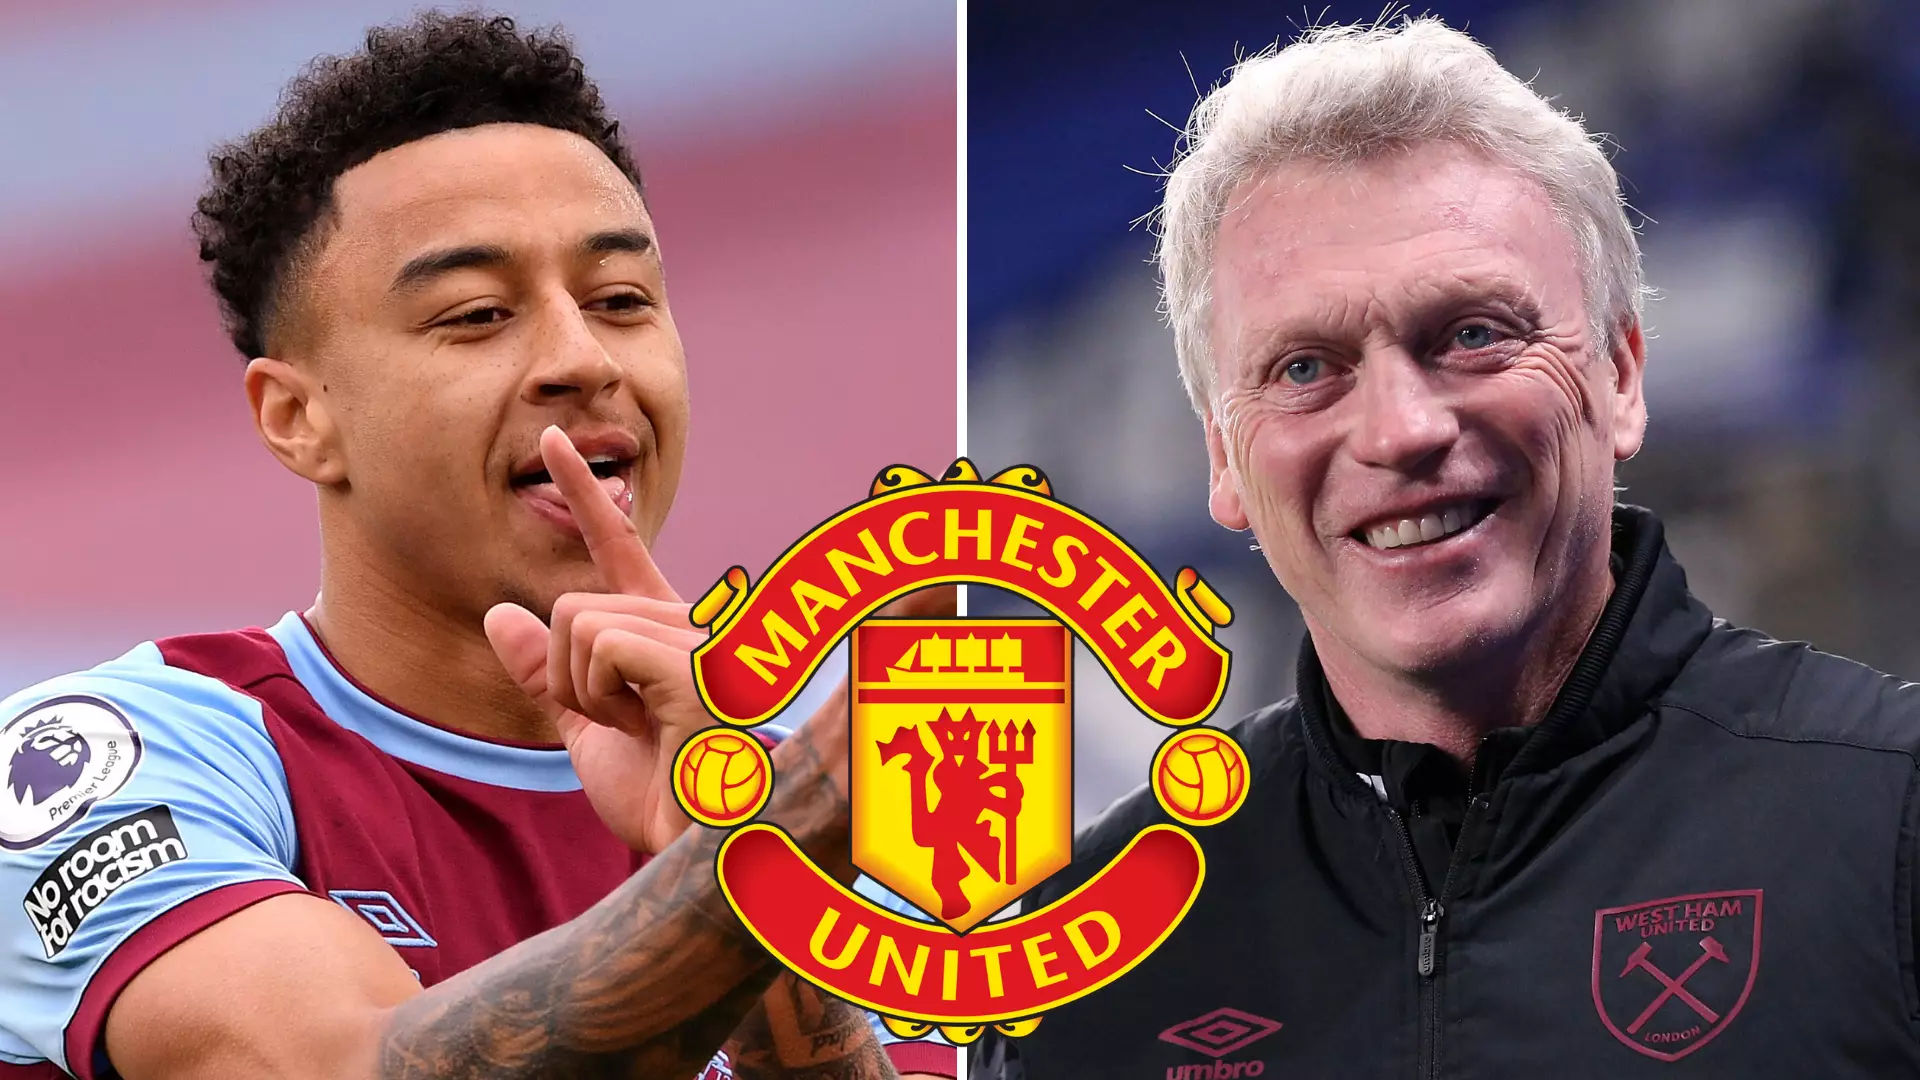 'Jesse Lingard Would Cost West Ham £60m To Sign In Permanent Deal From Manchester United'